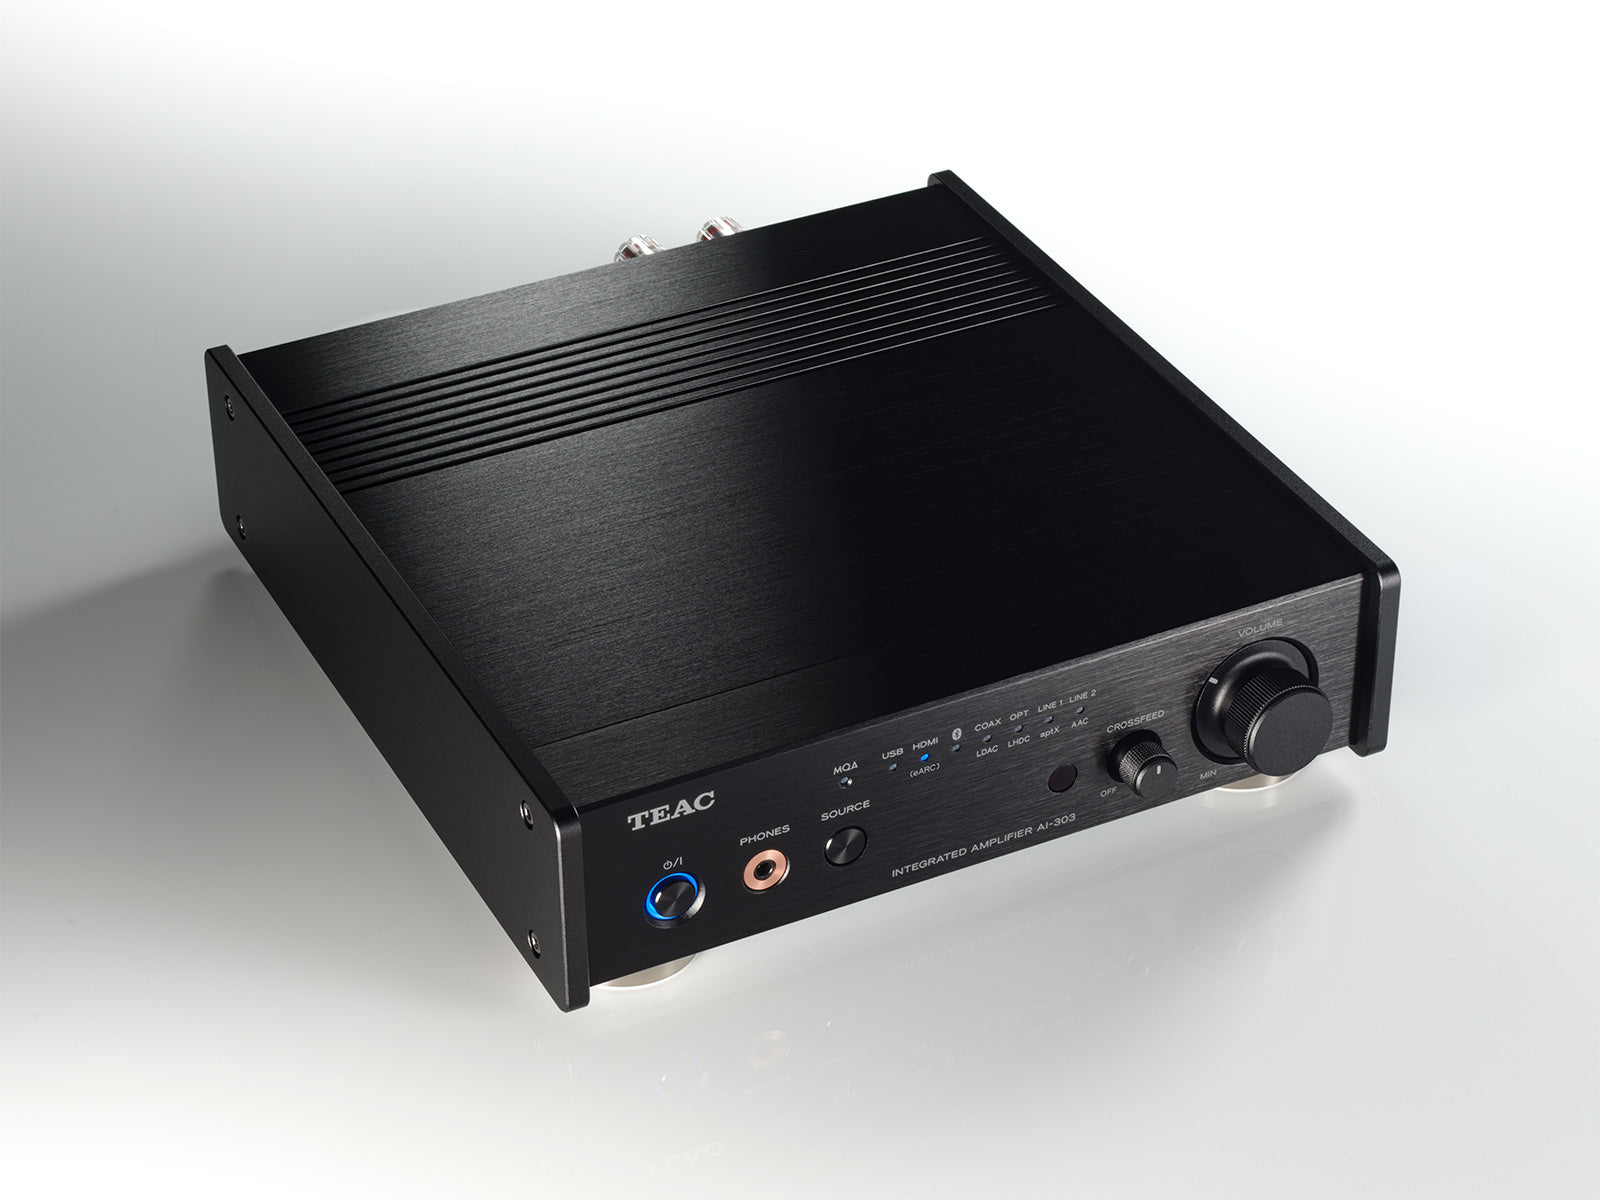 TEAC AI-303 USB DAC Integrated Amplifier Black — Safe and Sound HQ